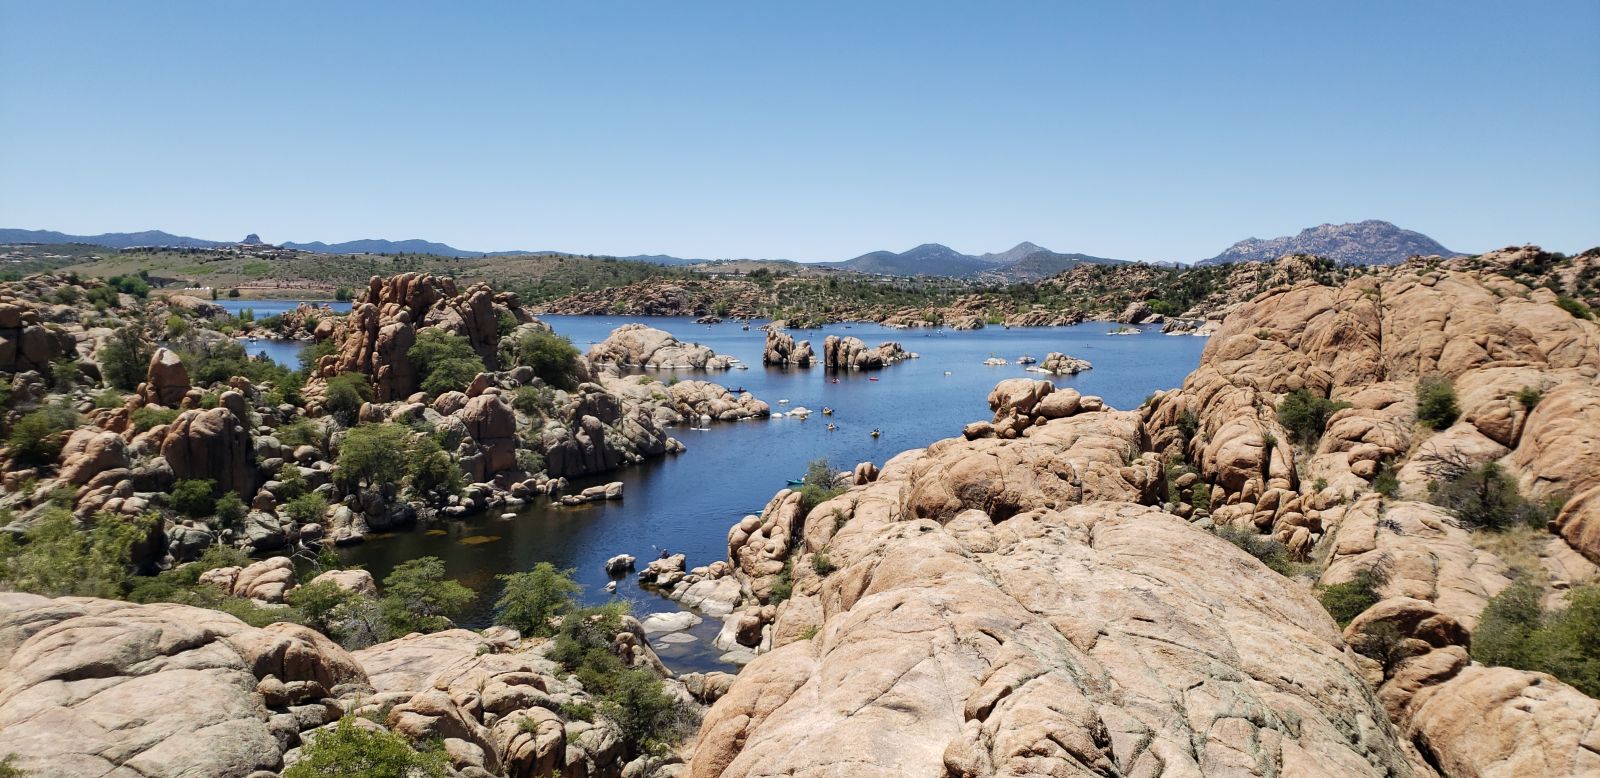 Watson Lake, the rocks sticking up out of the water are known as the granite dells